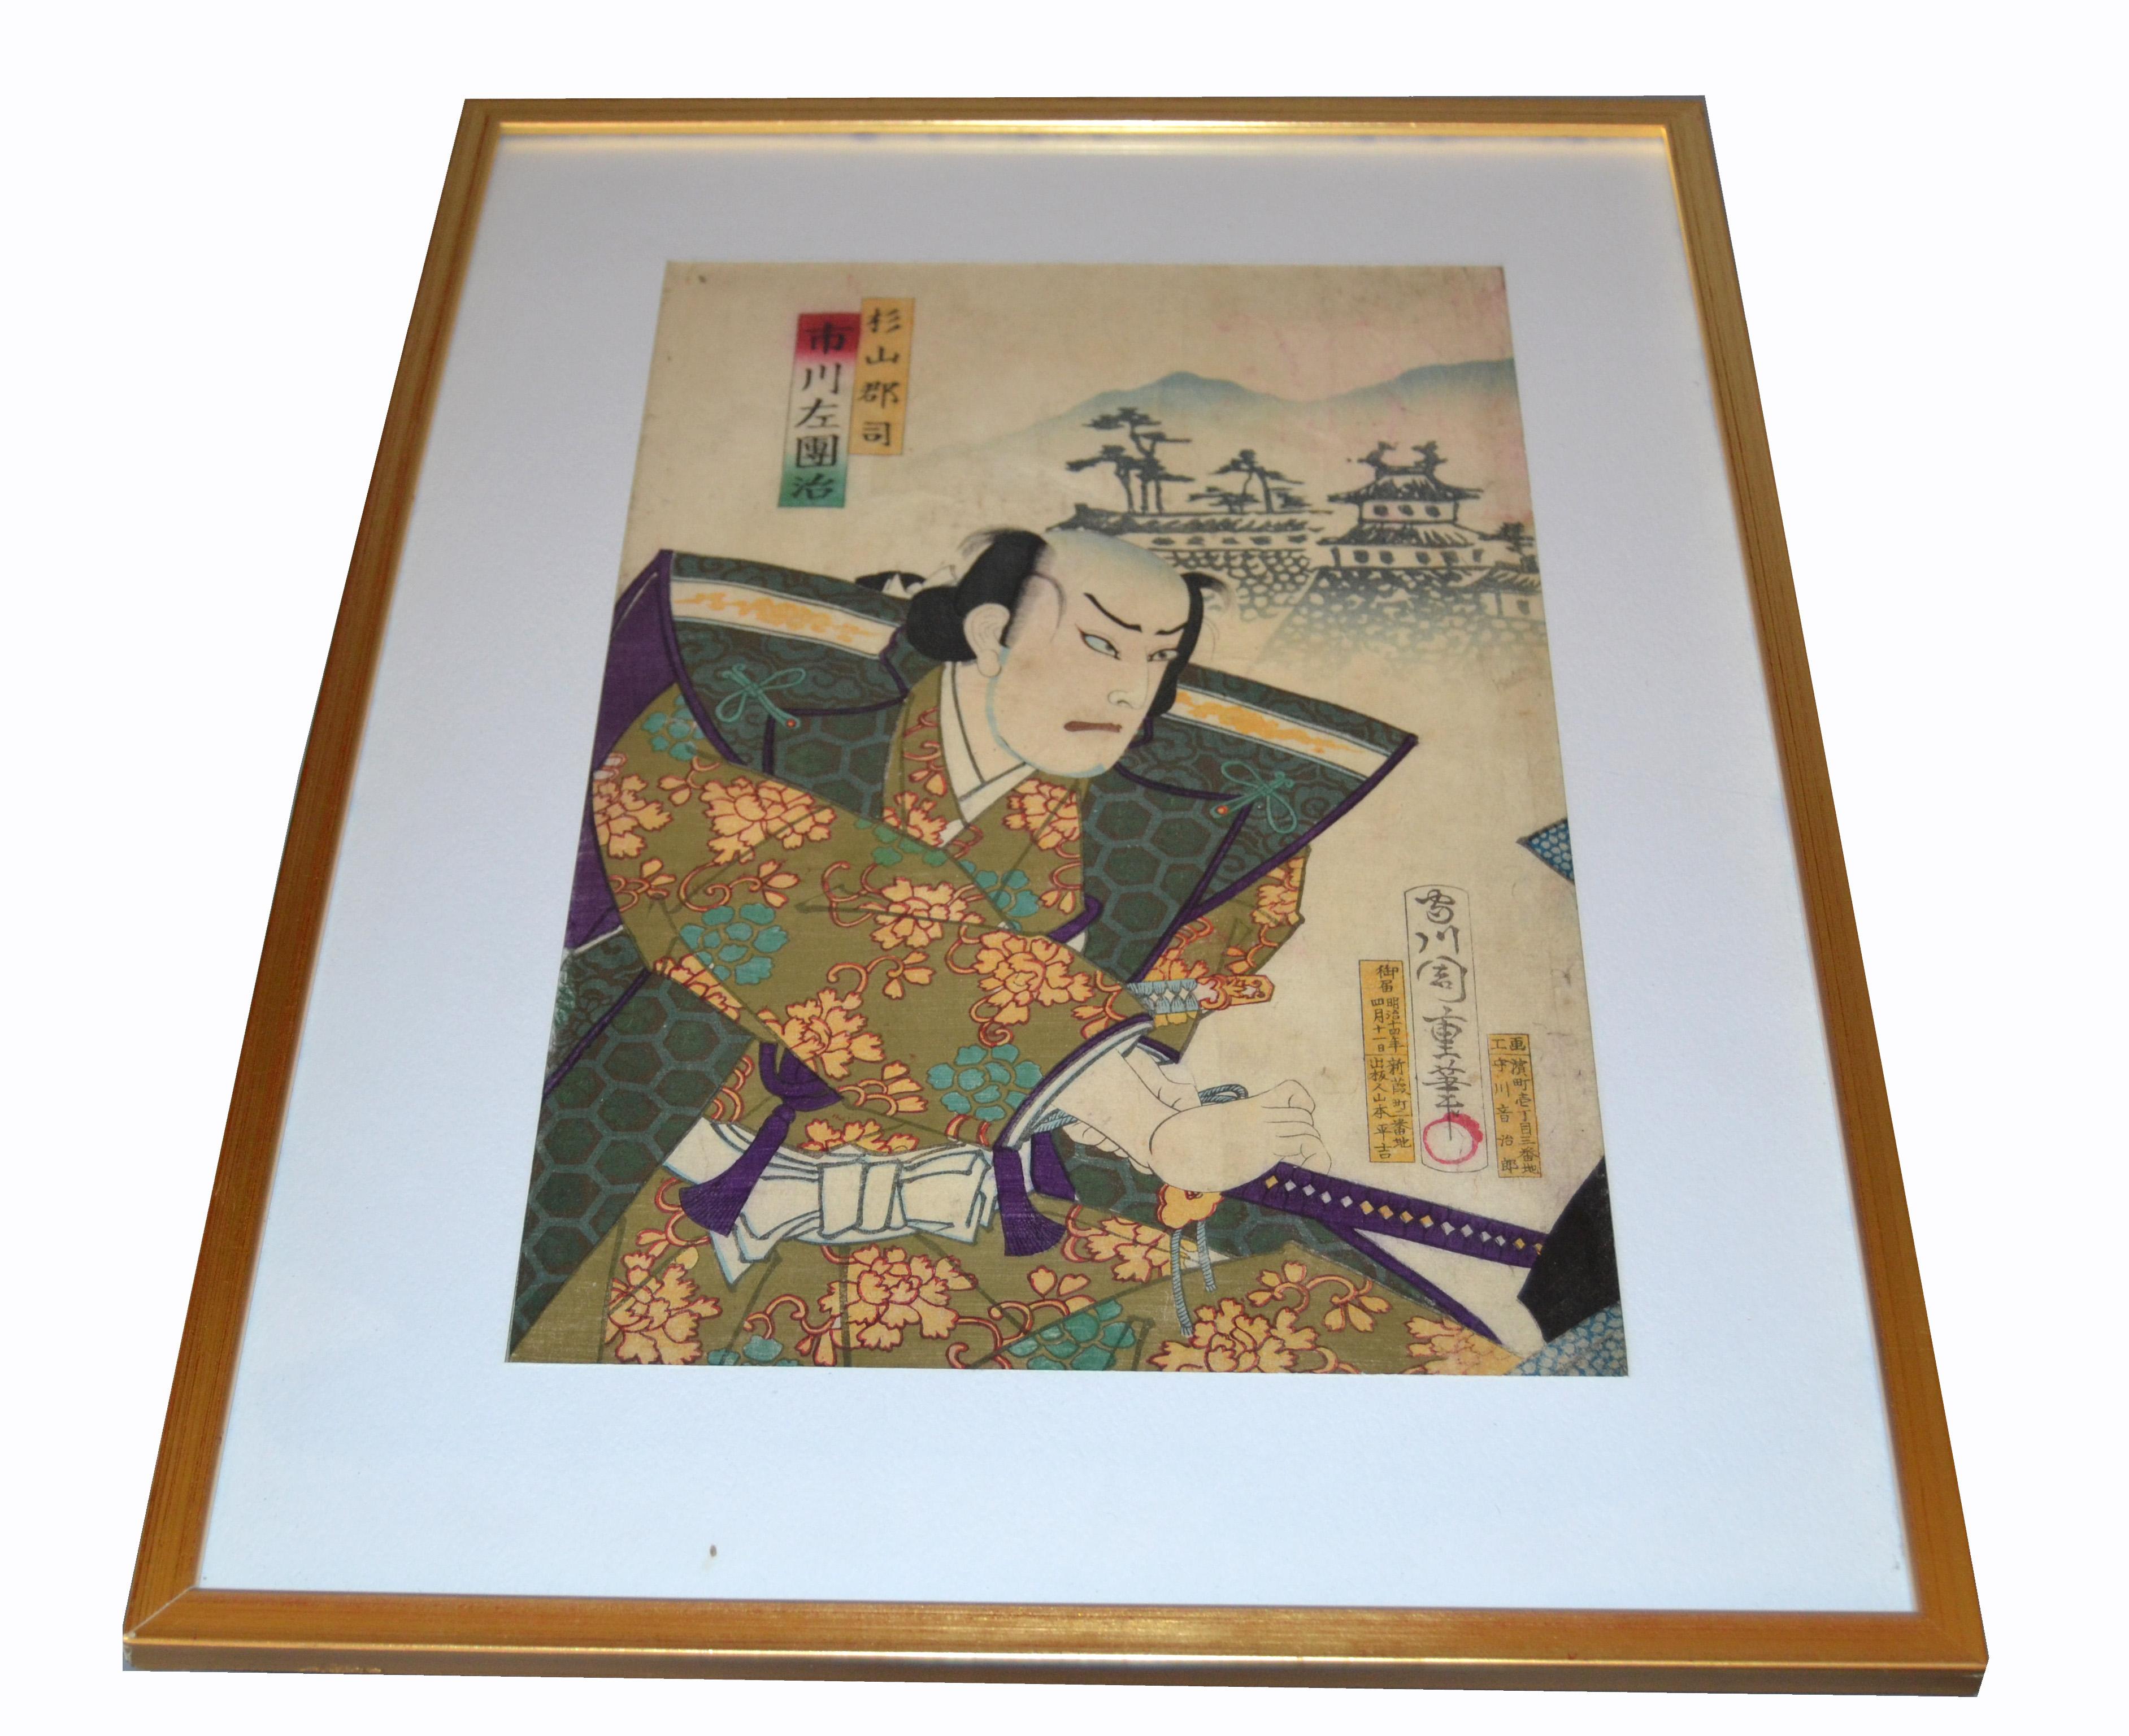 Late 19th Century Gilt Framed Chikashige Morikawa Japanese Woodblock Print on Parchment Paper 1880